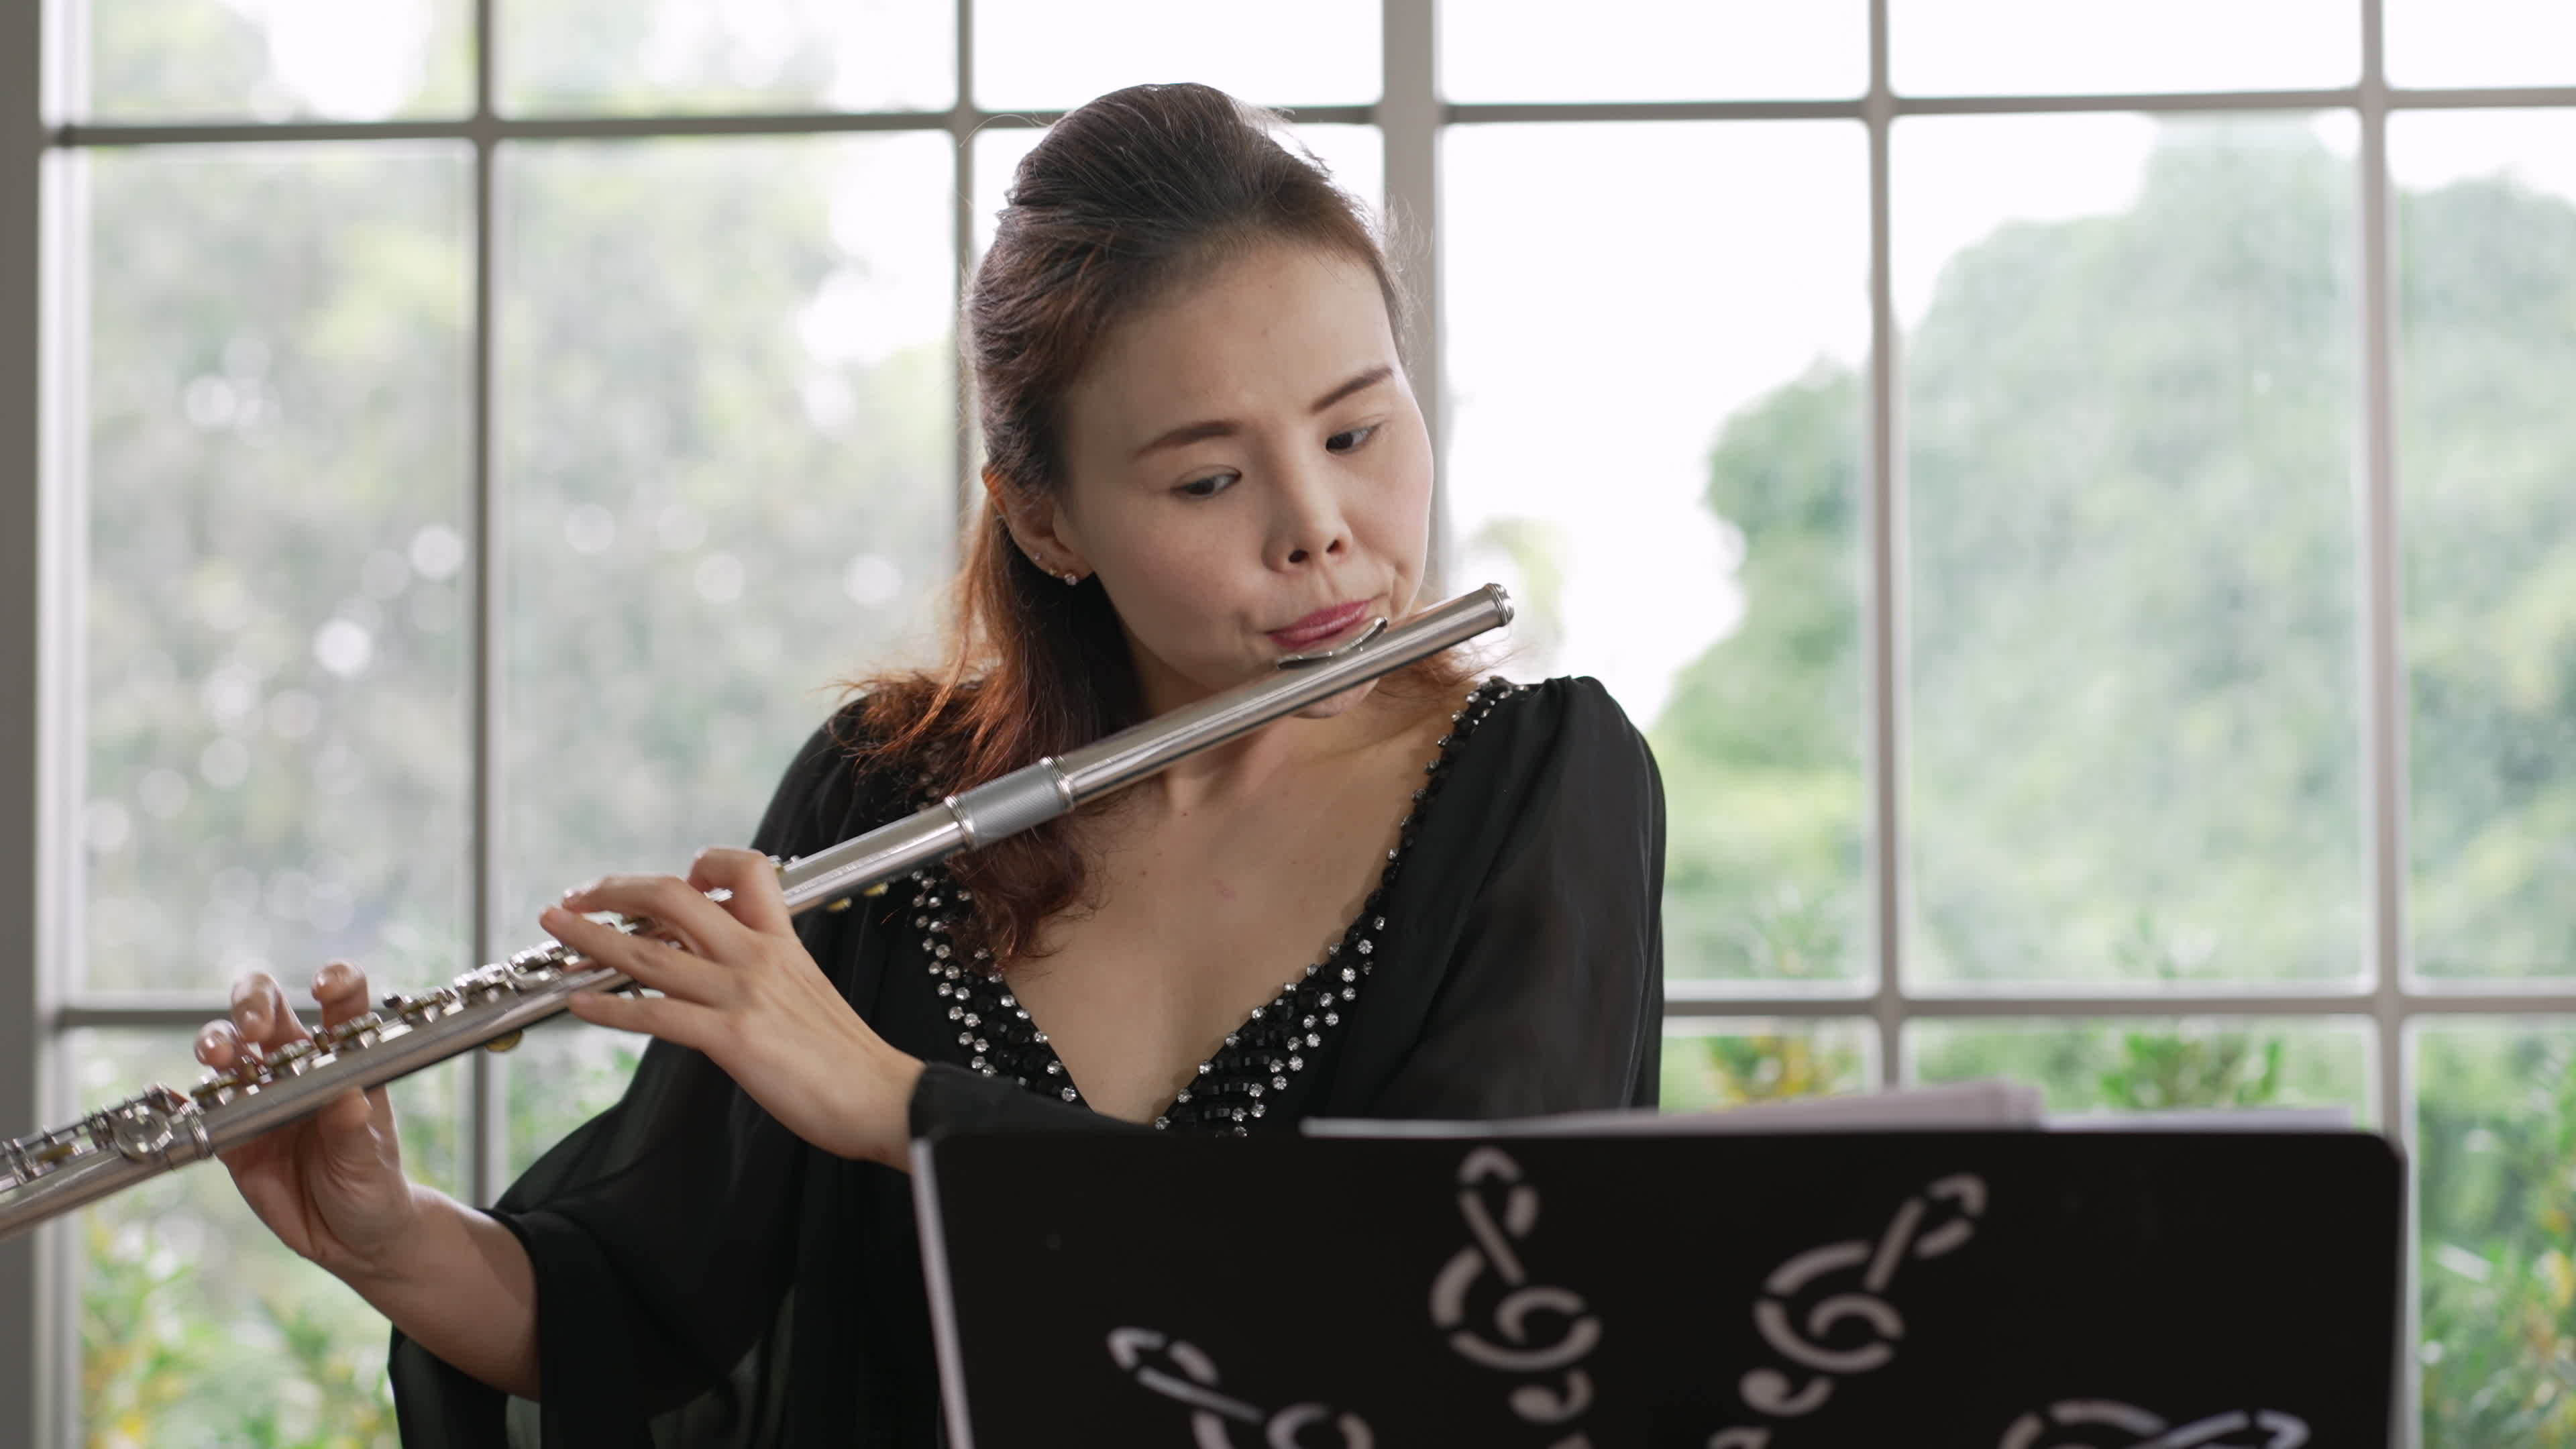 Flute: Musician, A musical wind instrument in which the wind is directed against a sharp edge. 3840x2160 4K Wallpaper.